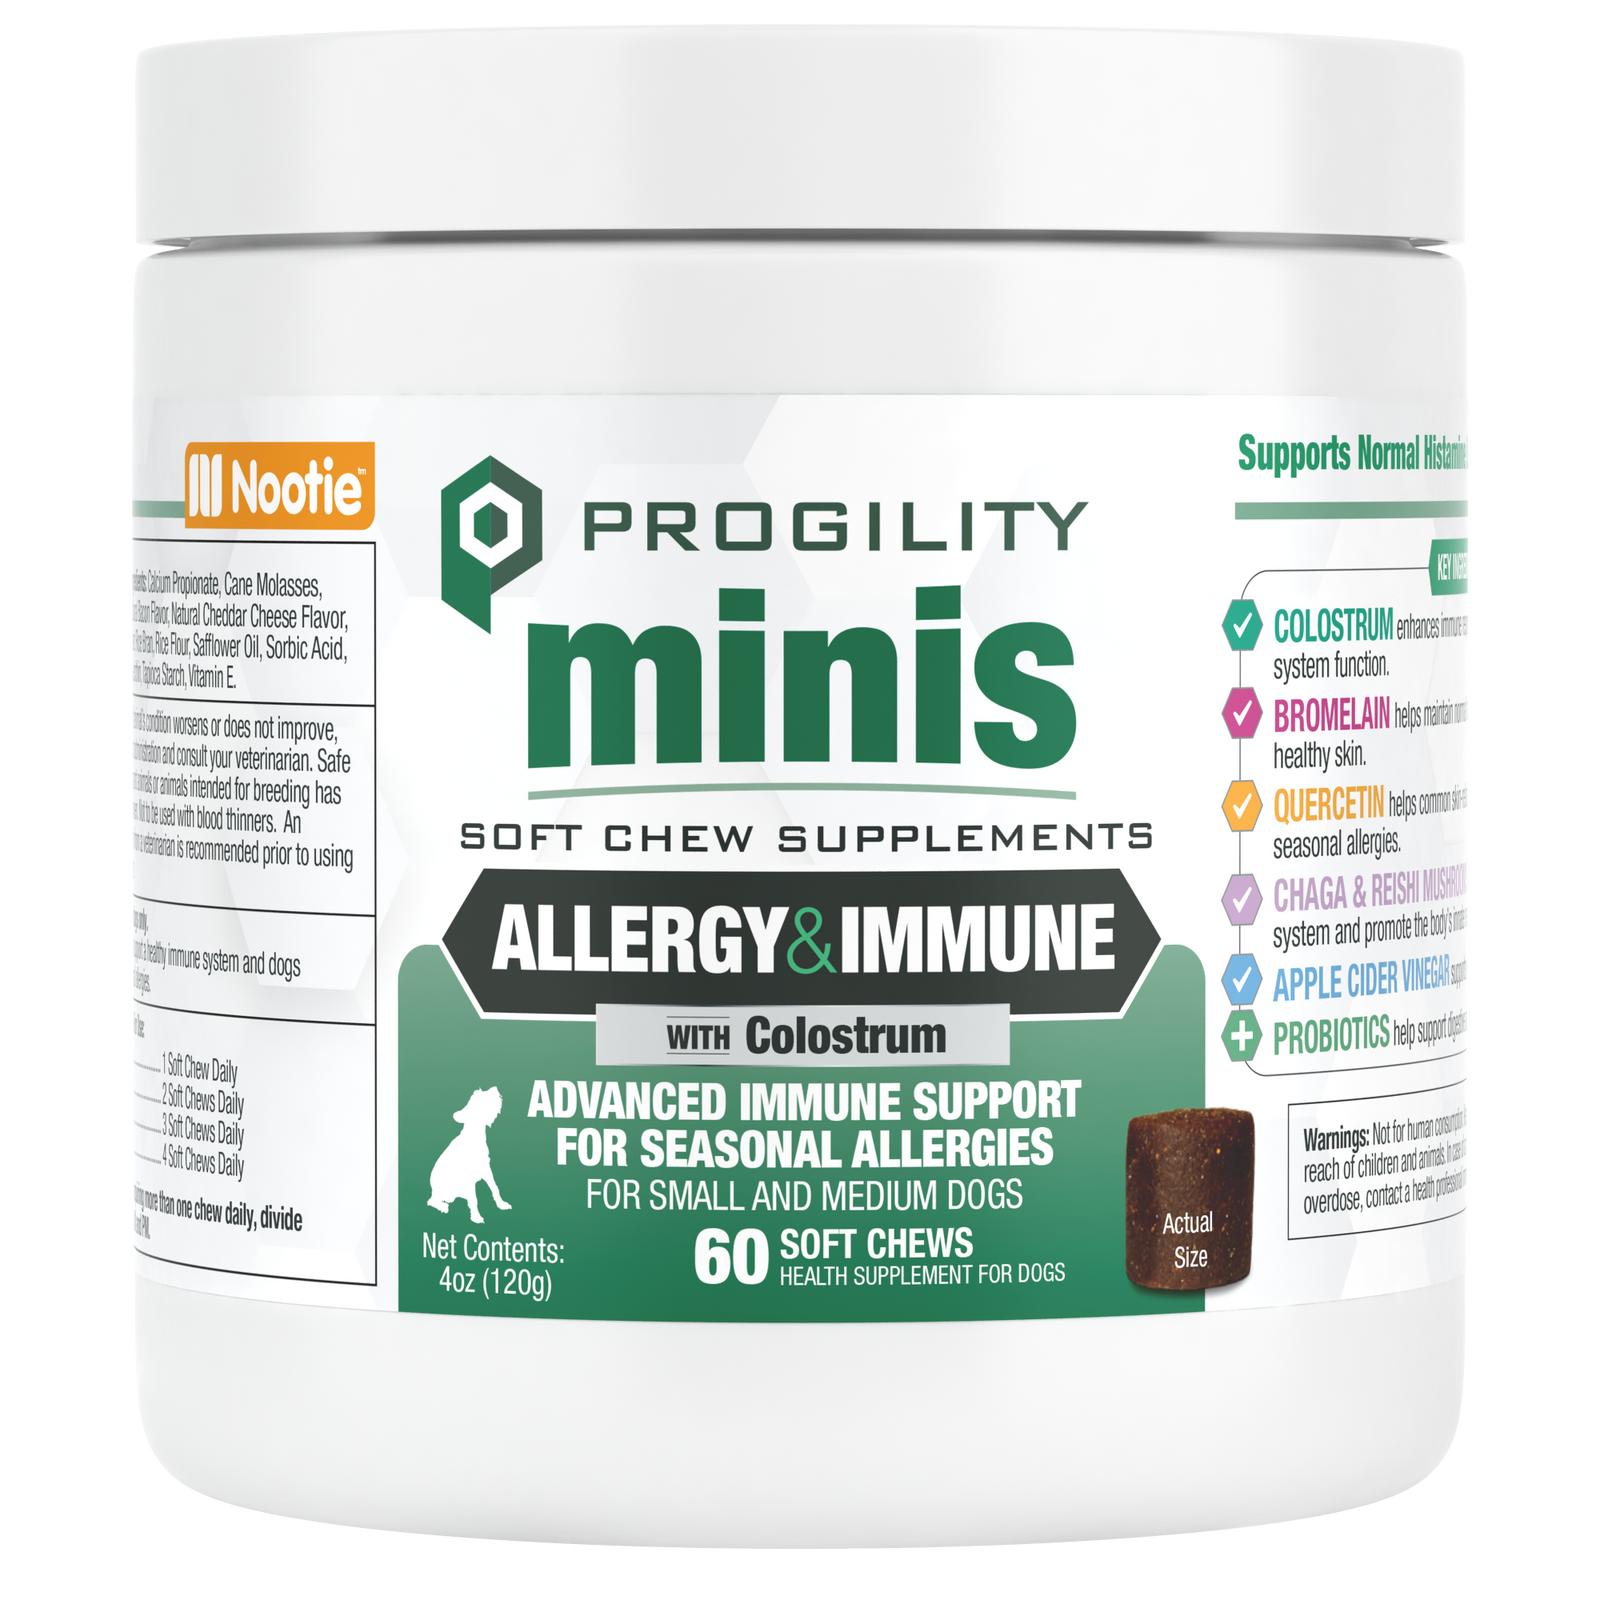 Progility Minis Allergy & Immune Soft Chew Supplements for Dogs for Seasonal Allergy Support | Advanced Immunity Support - For Small and Medium Dogs